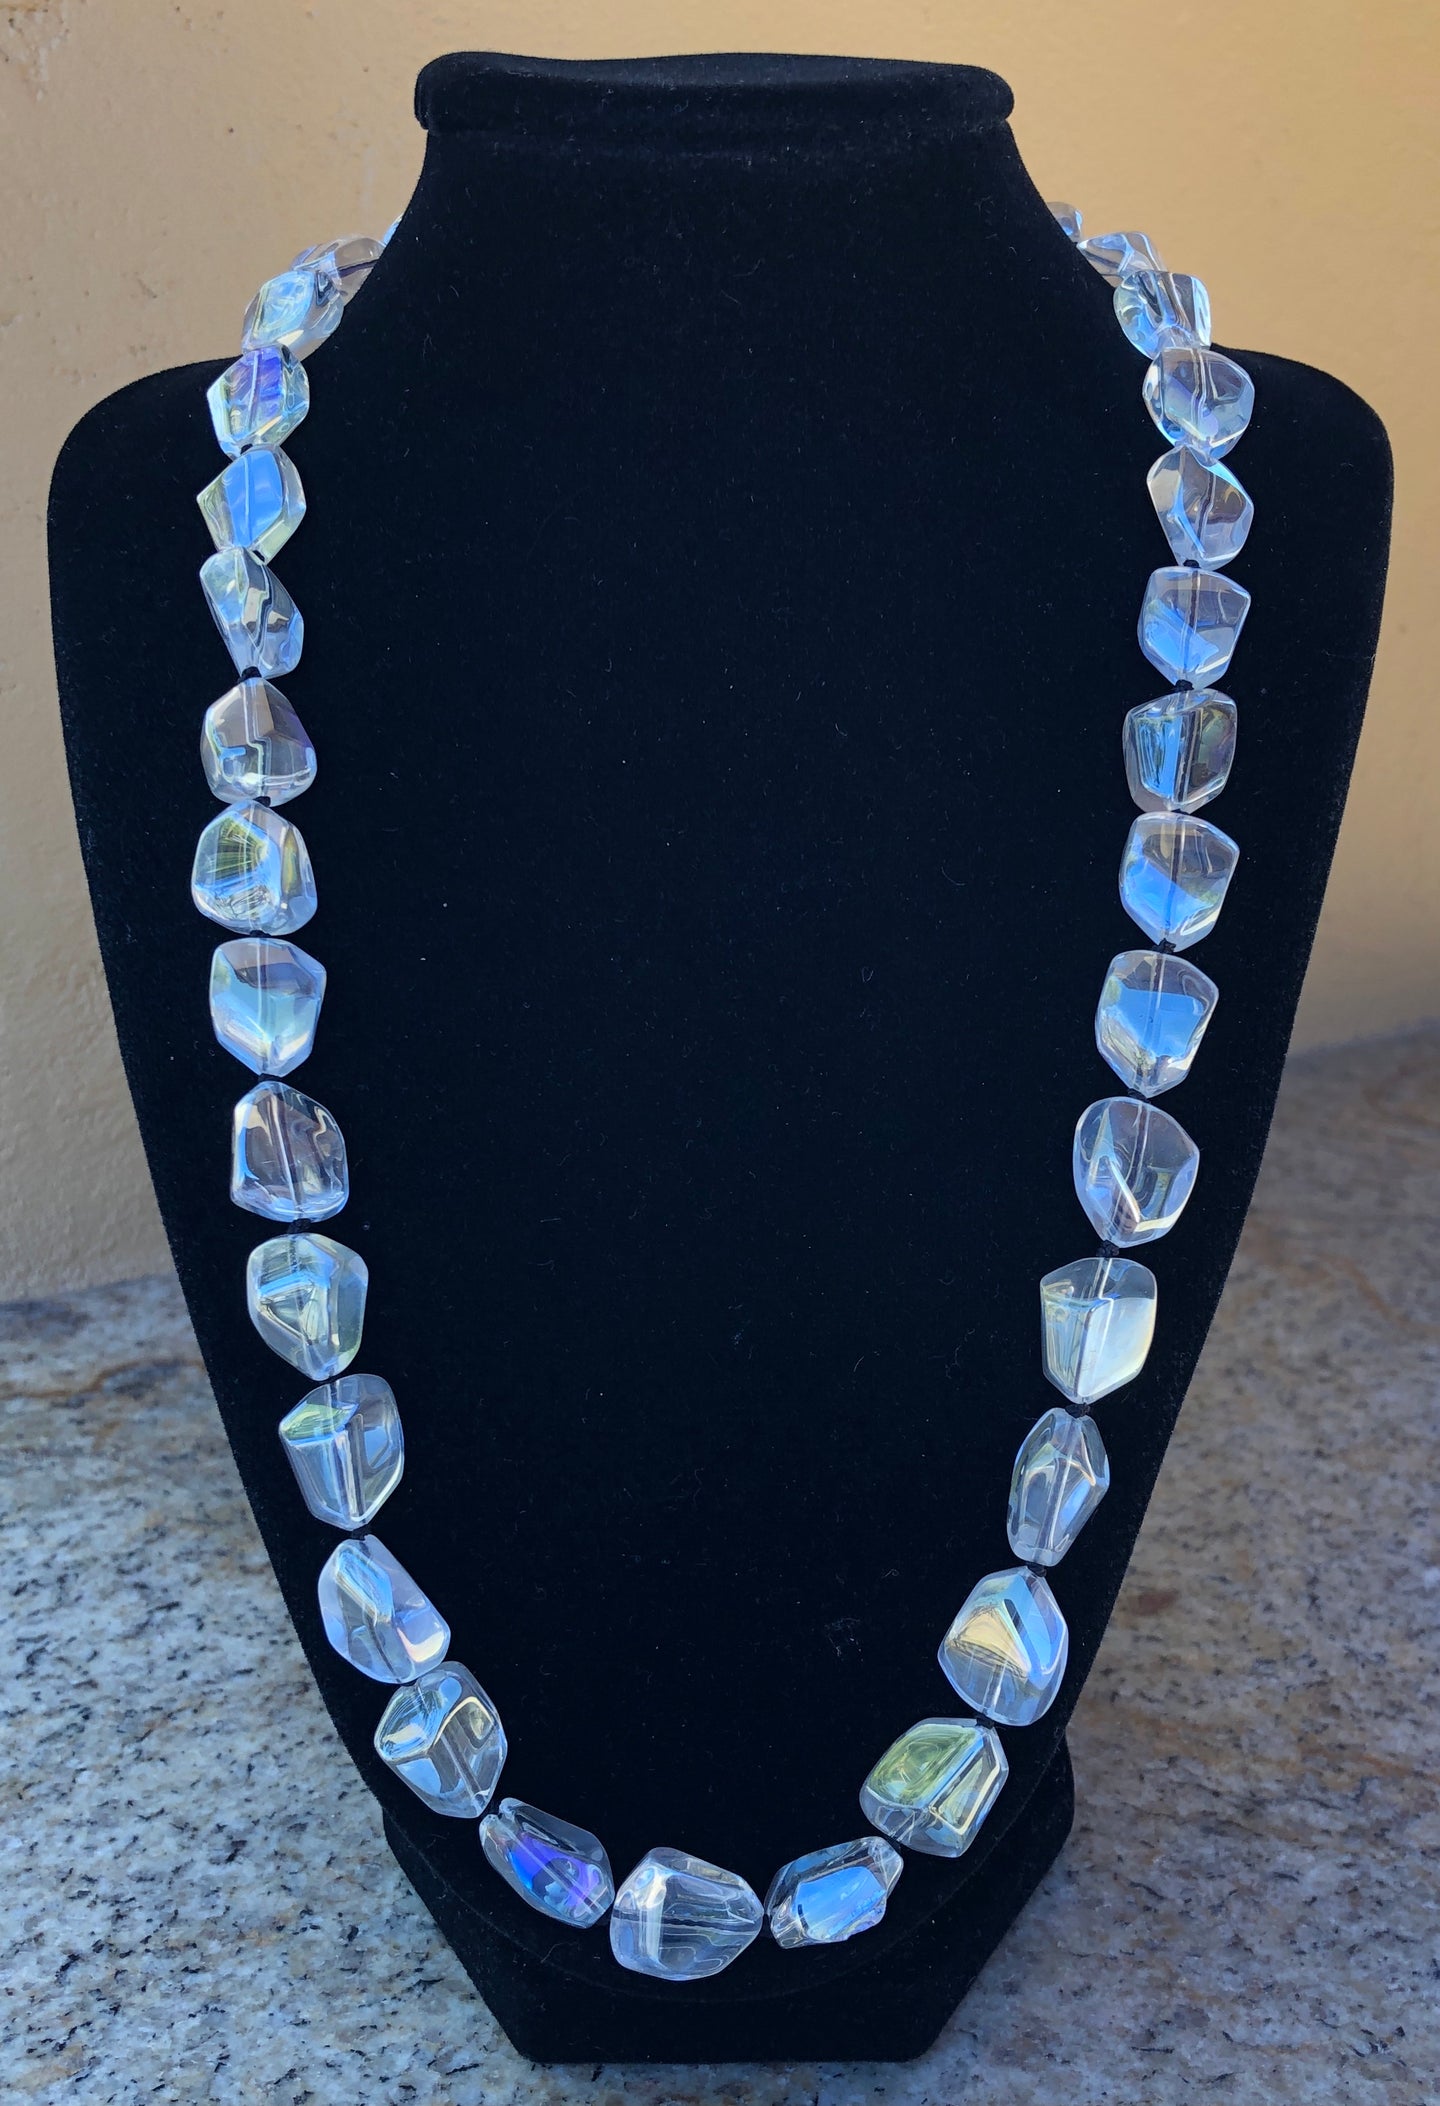 Necklace - Iridescent Crystal Beads